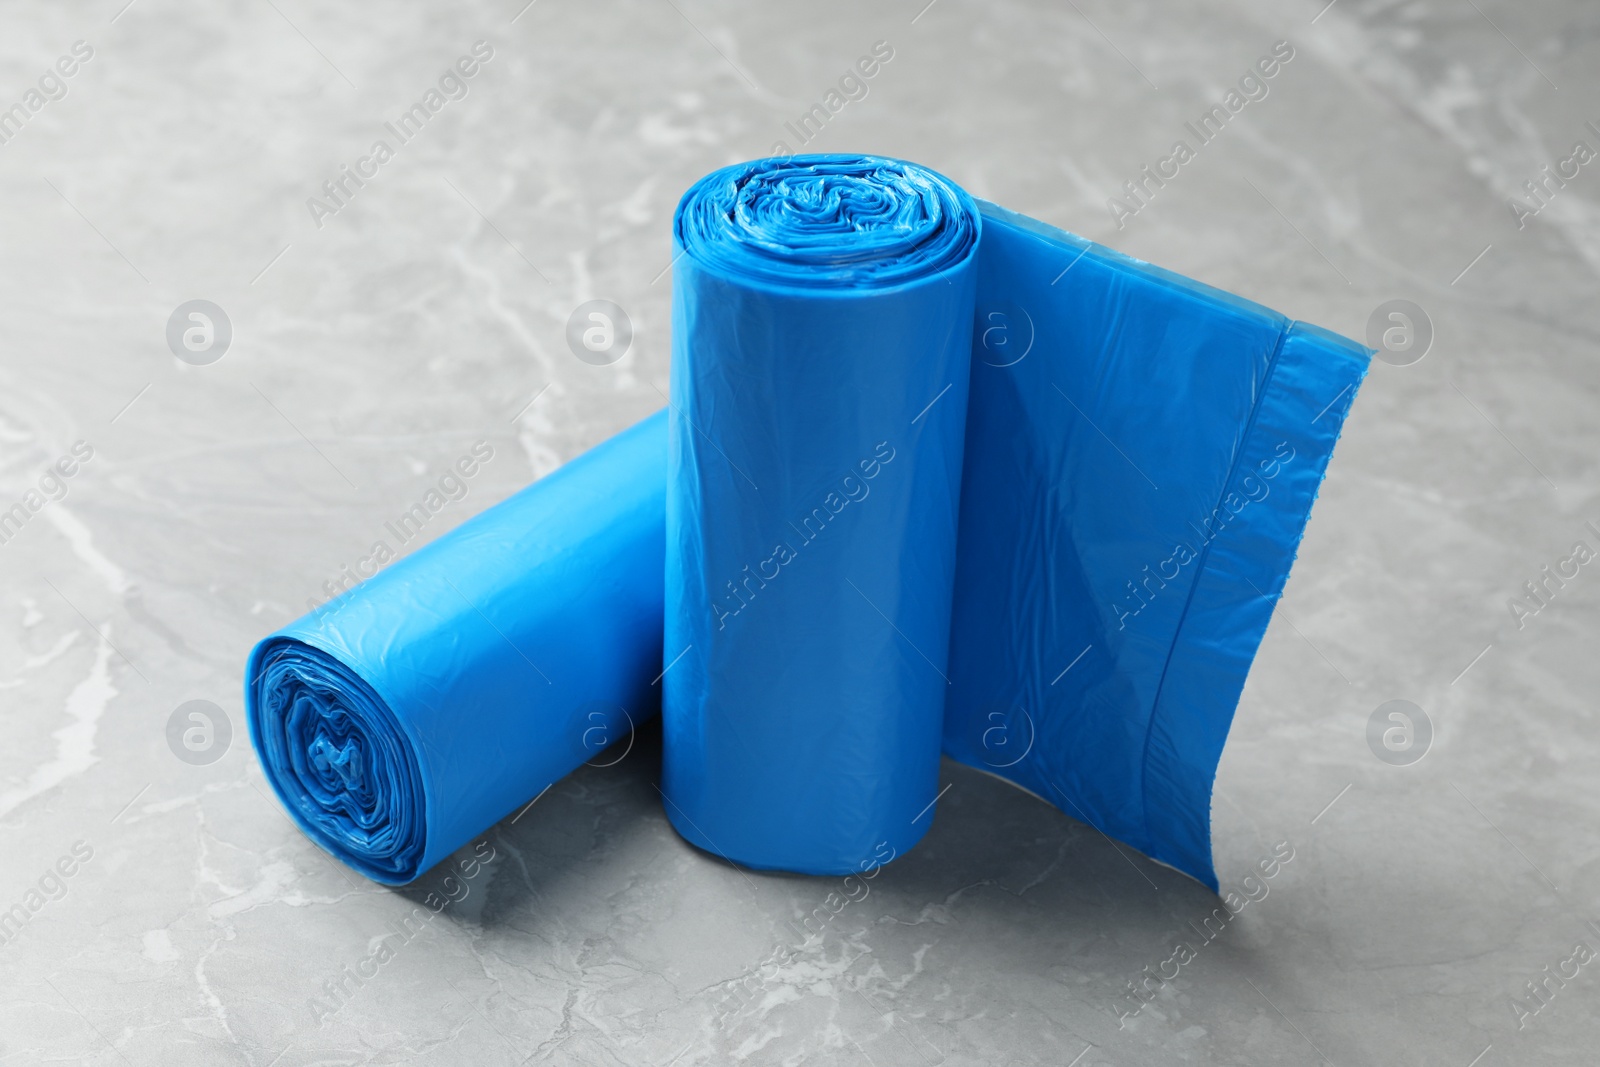 Photo of Rolls of light blue garbage bags on grey marble table